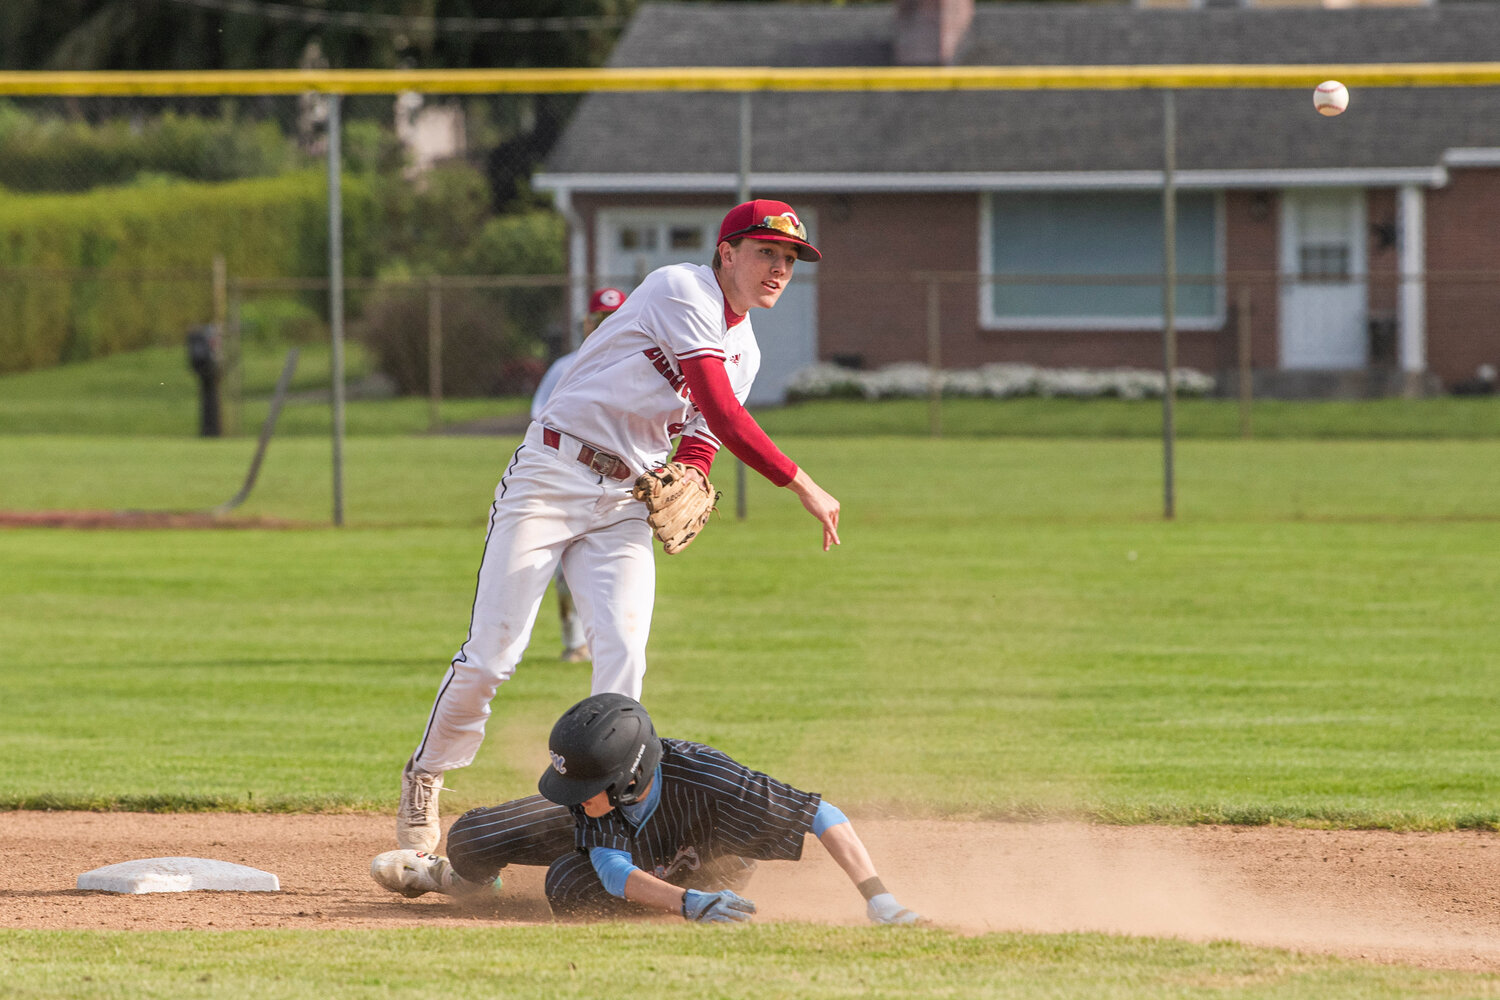 W.F. West’s Weston Potter (4) turns a double-play during a game against Mark Morris at Bearcat Stadium in Chehalis on Tuesday, May 9.